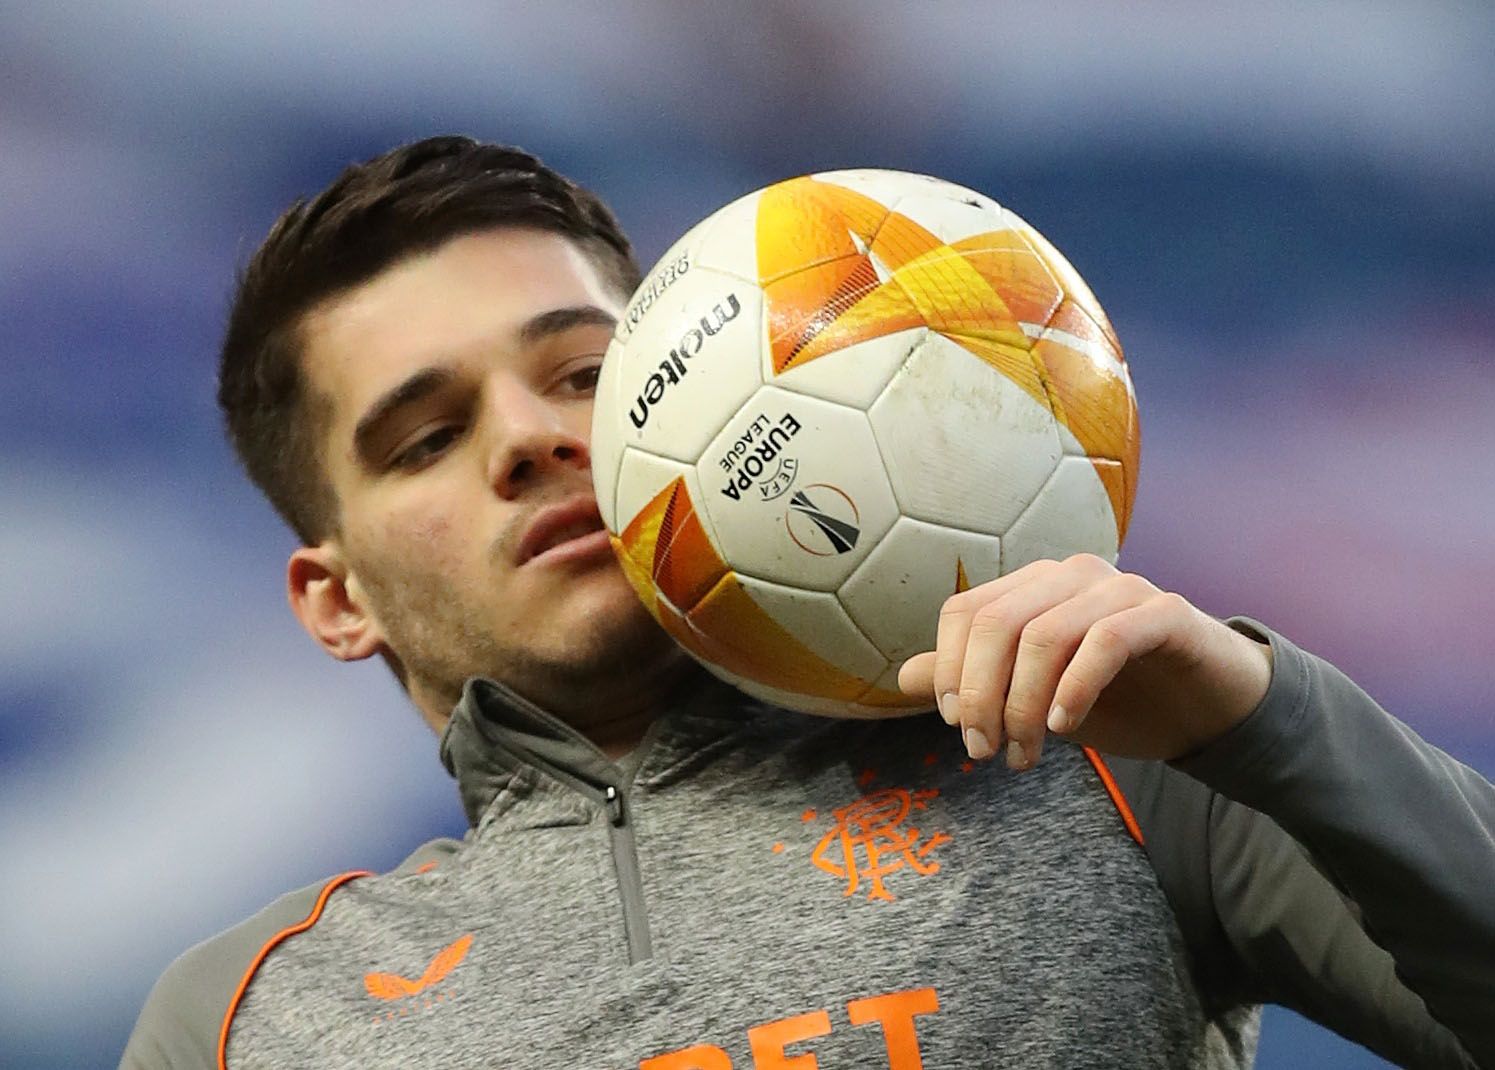 Soccer Football - Europa League - Round of 32 Second Leg - Rangers v Royal Antwerp - Ibrox, Glasgow, Scotland, Britain - February 25, 2021 Rangers' Ianis Hagi during the warm up before the match Pool via REUTERS/Russell Cheyne